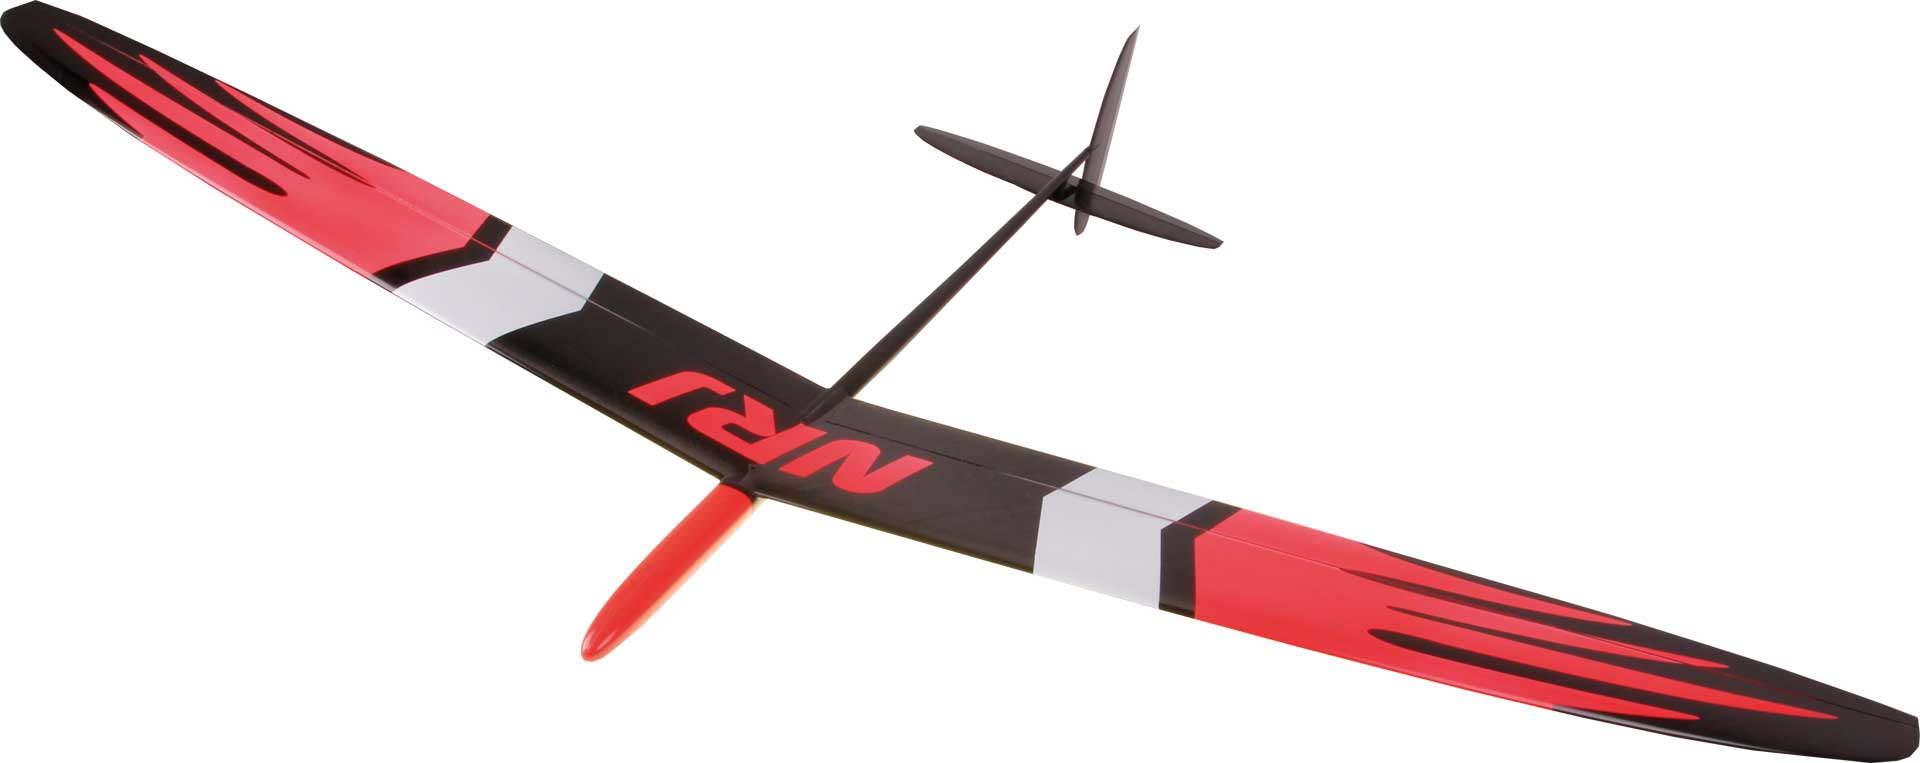 OA-Composites NRJ F3K ROT # 2 "spread tow 60" Discus Launch Glider DLG